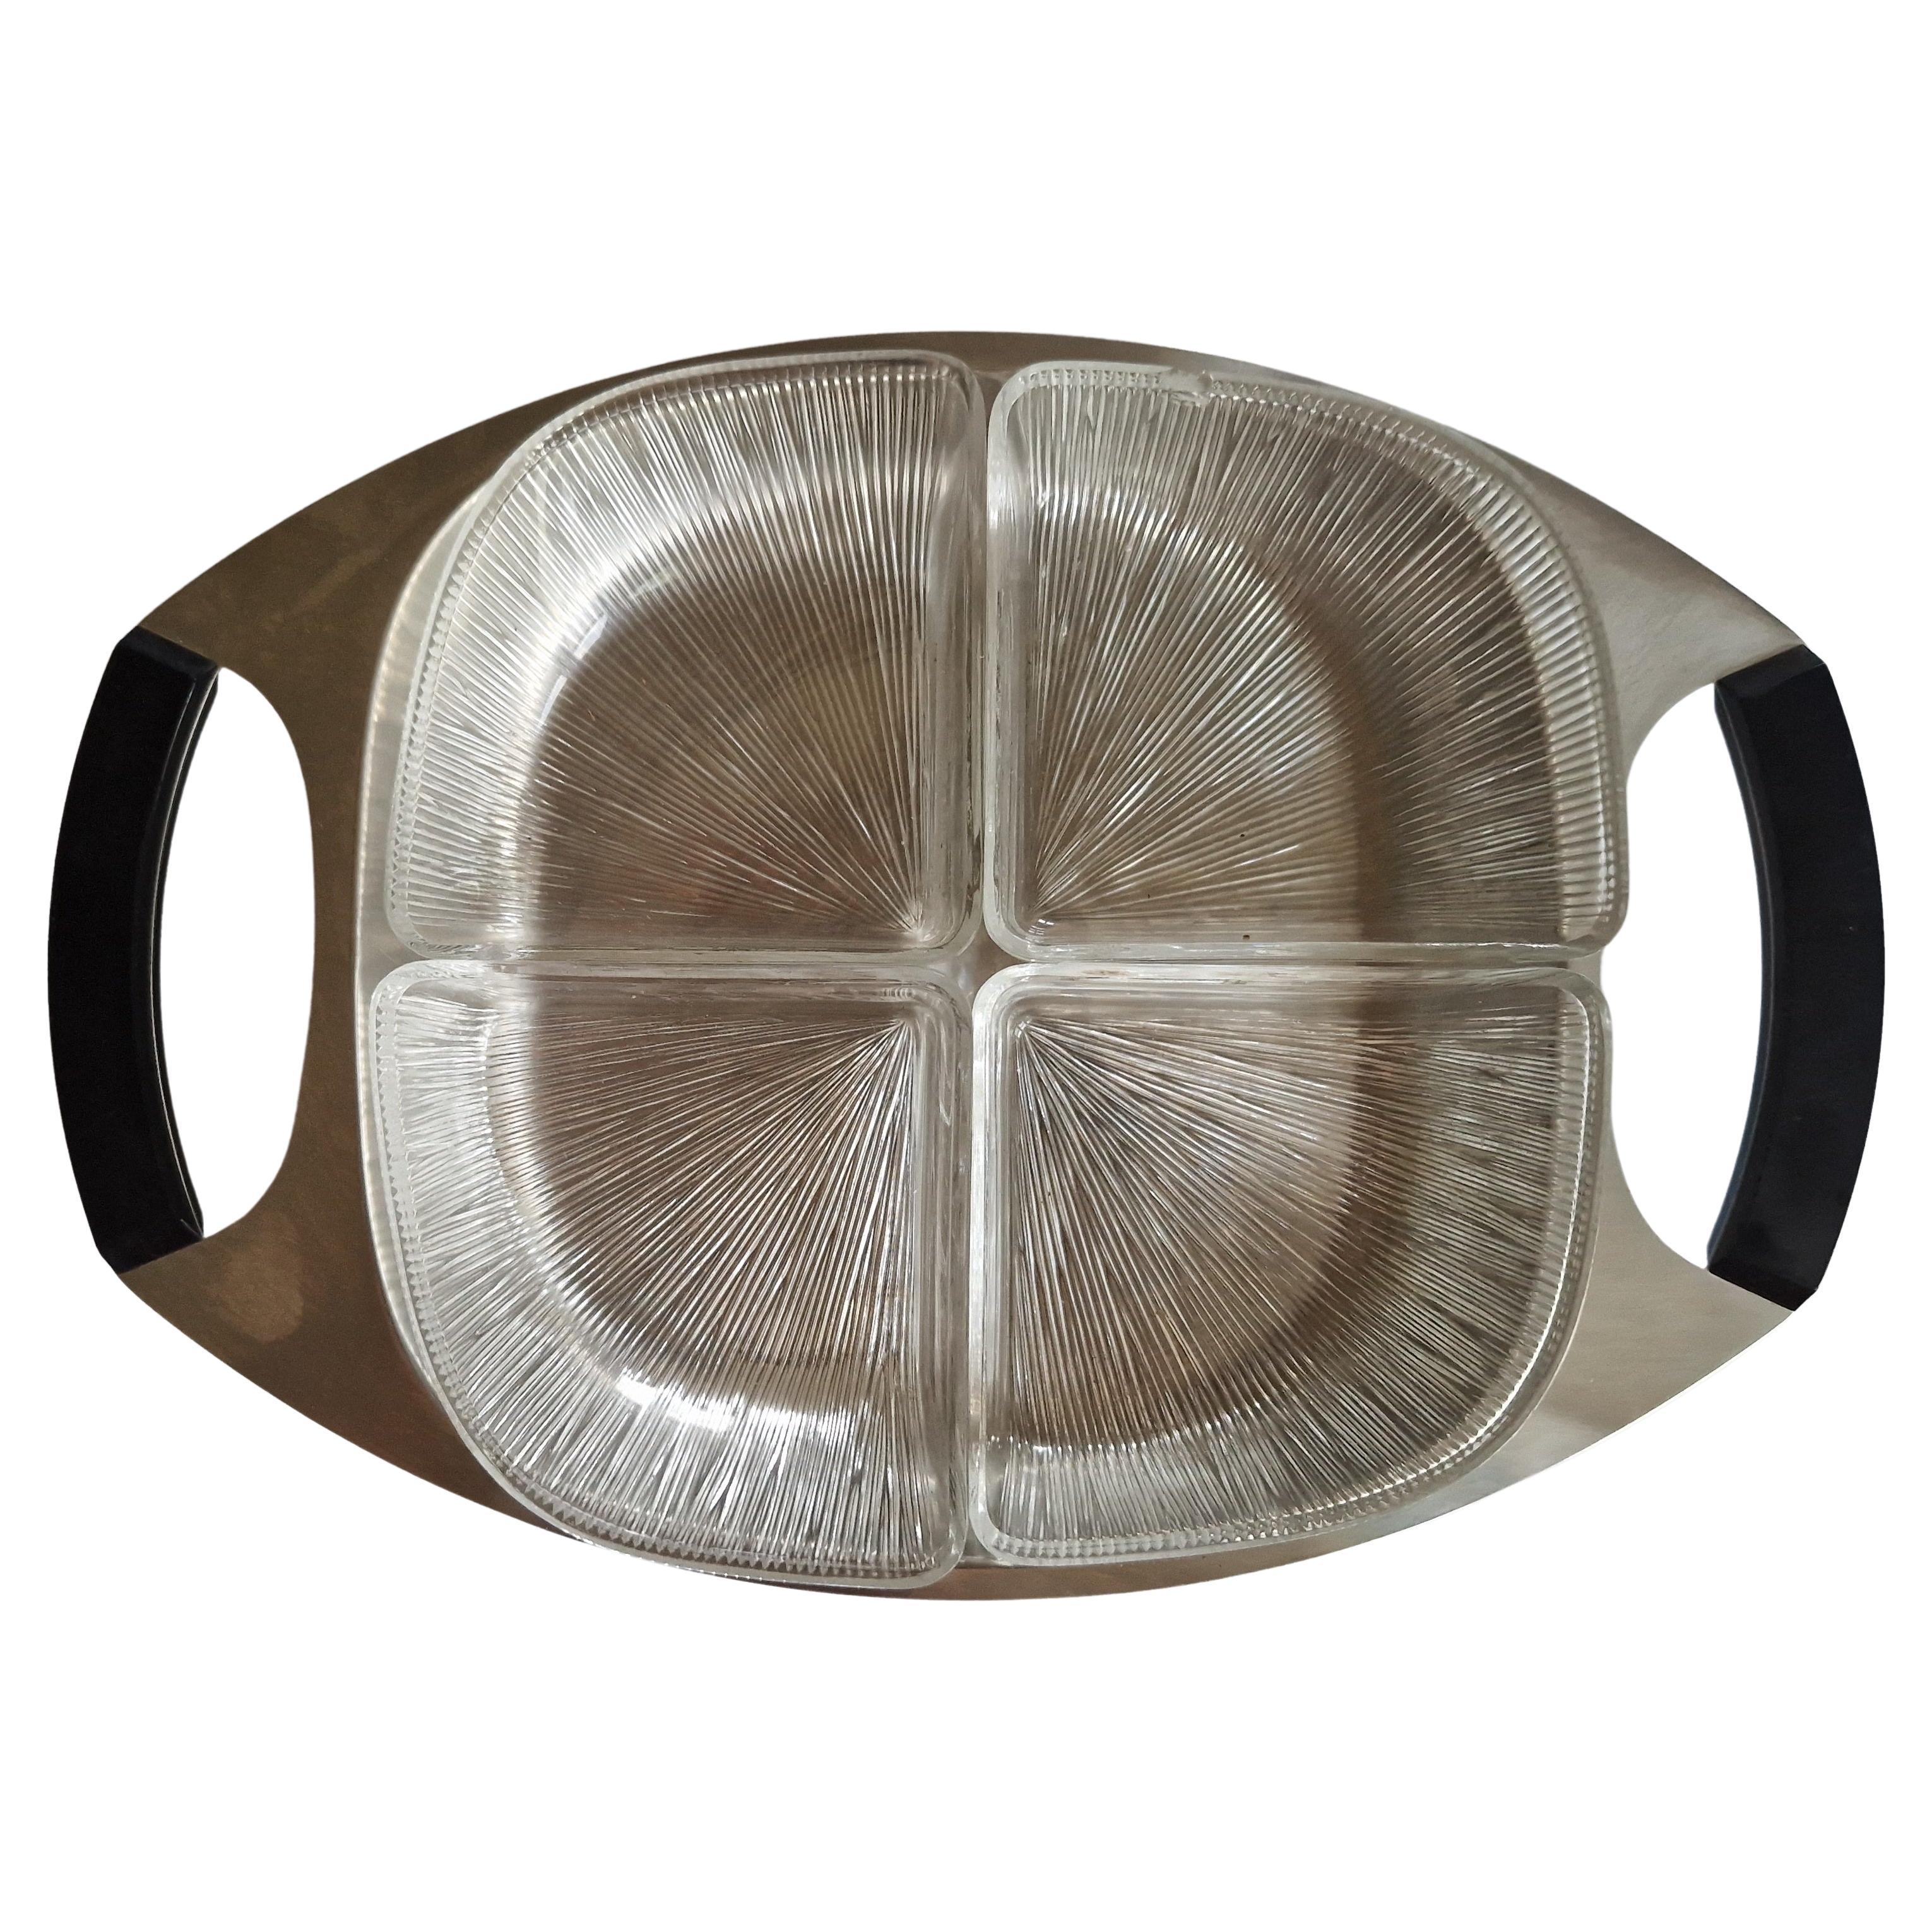 Midcentury Serving Plate Stainless Steel and Glass Cromargan, Germany, 1970s For Sale